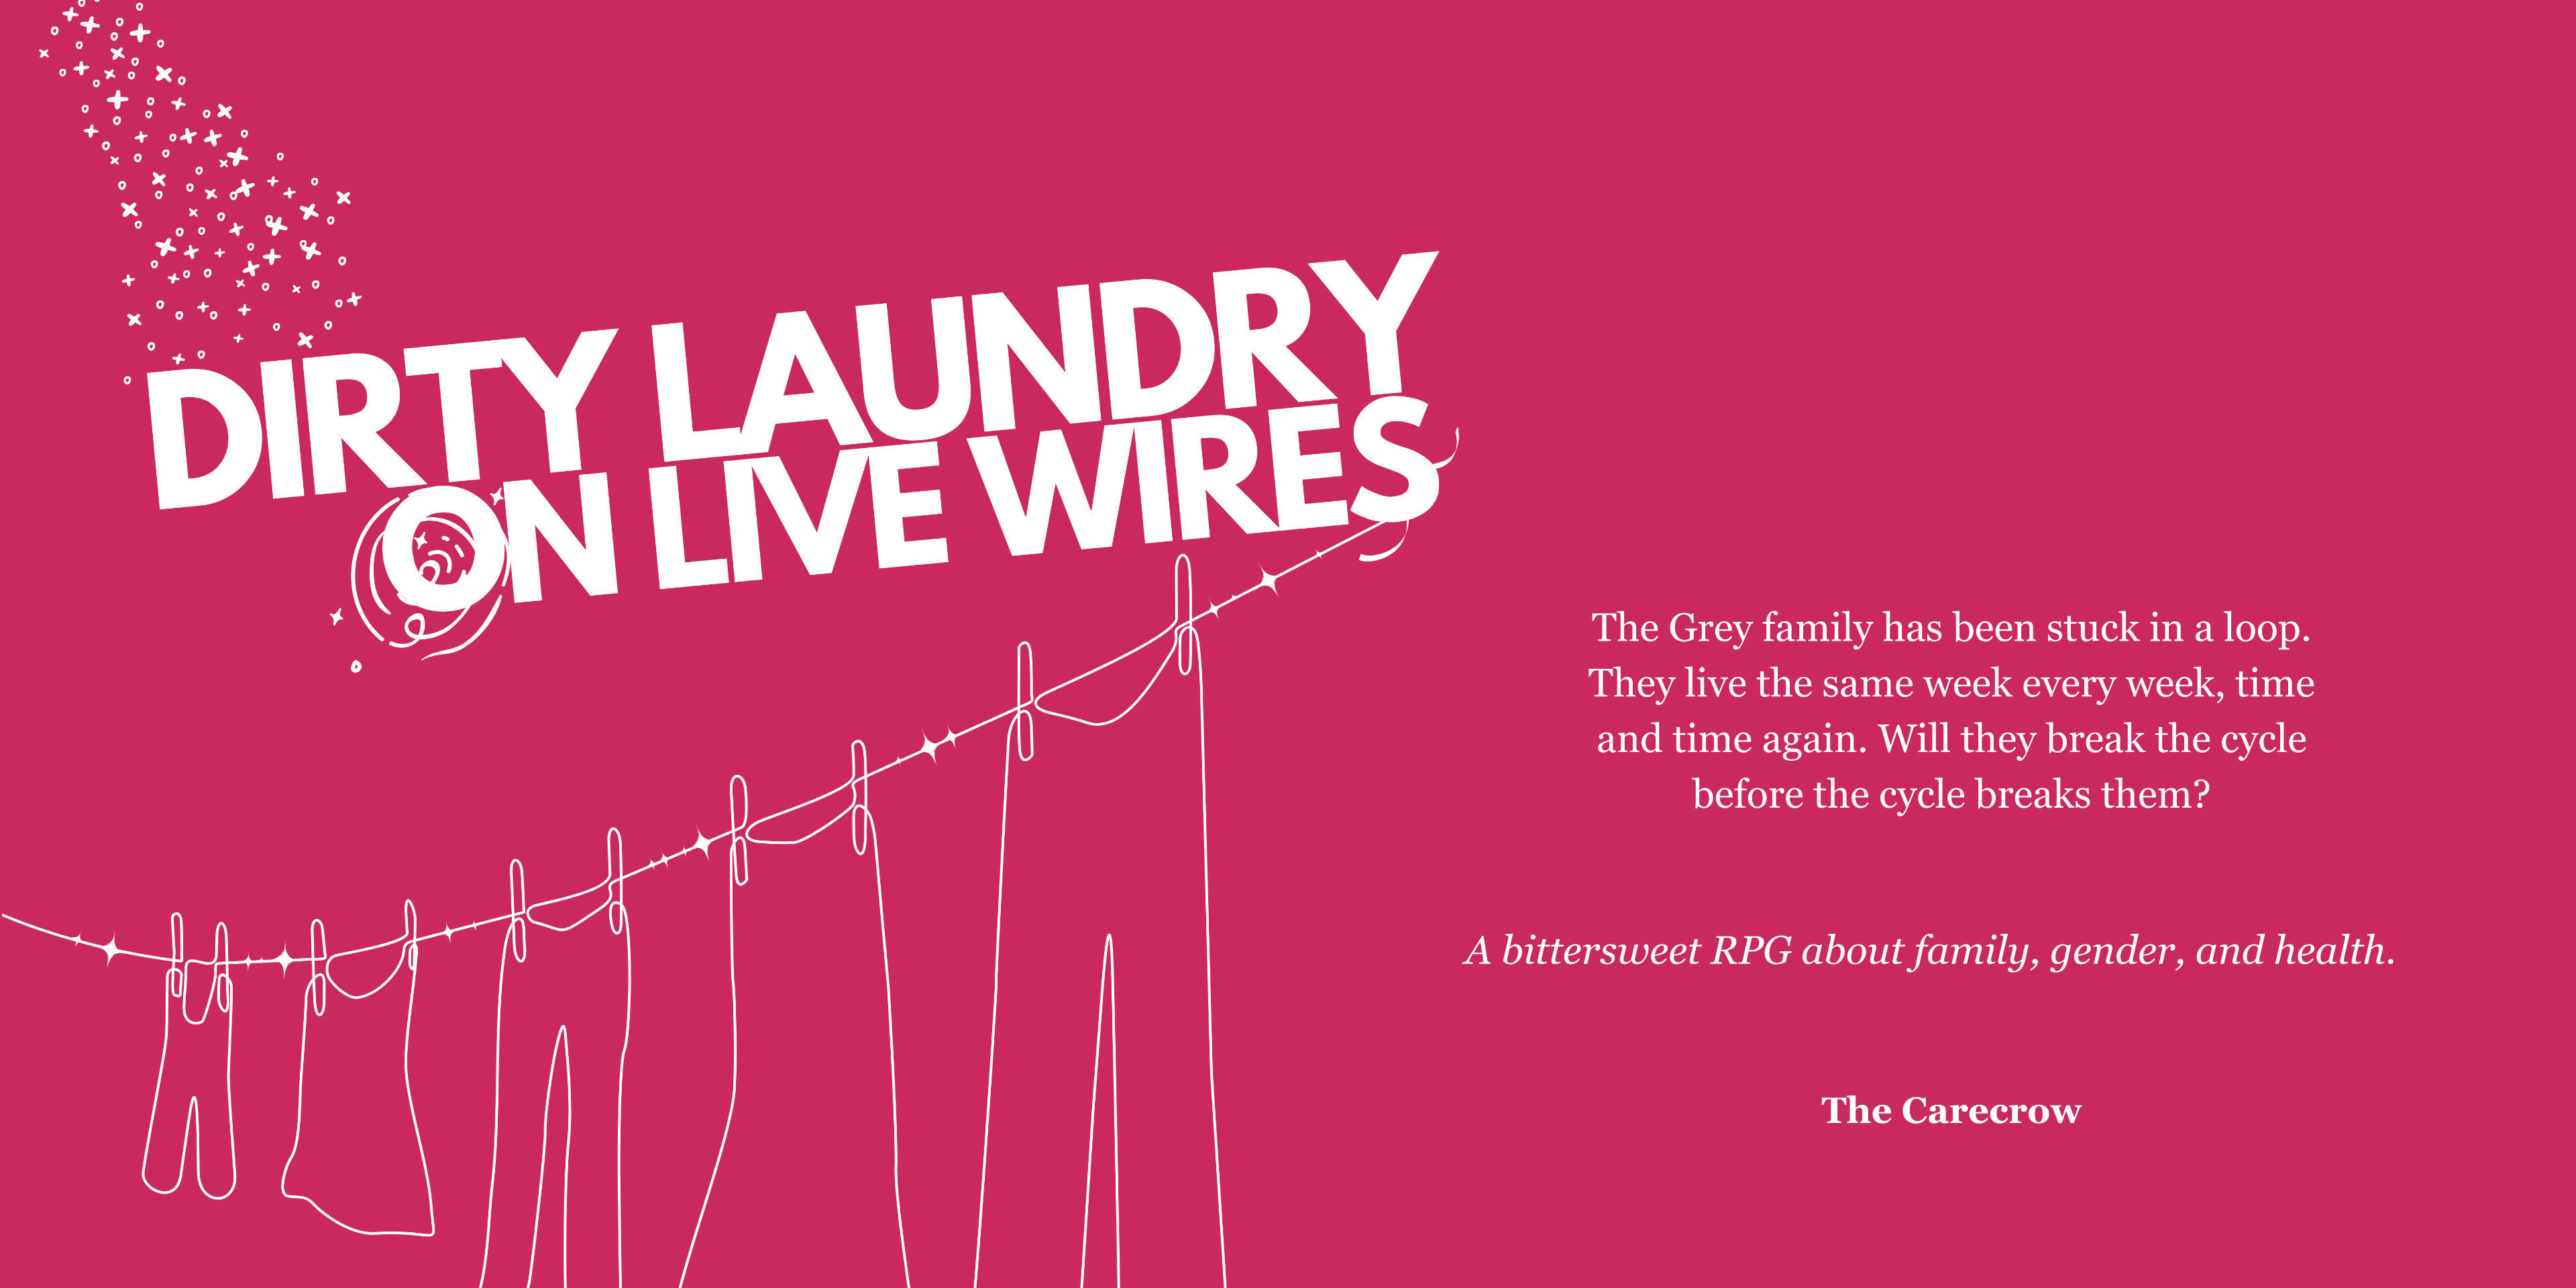 Dirty Laundry on Live Wires